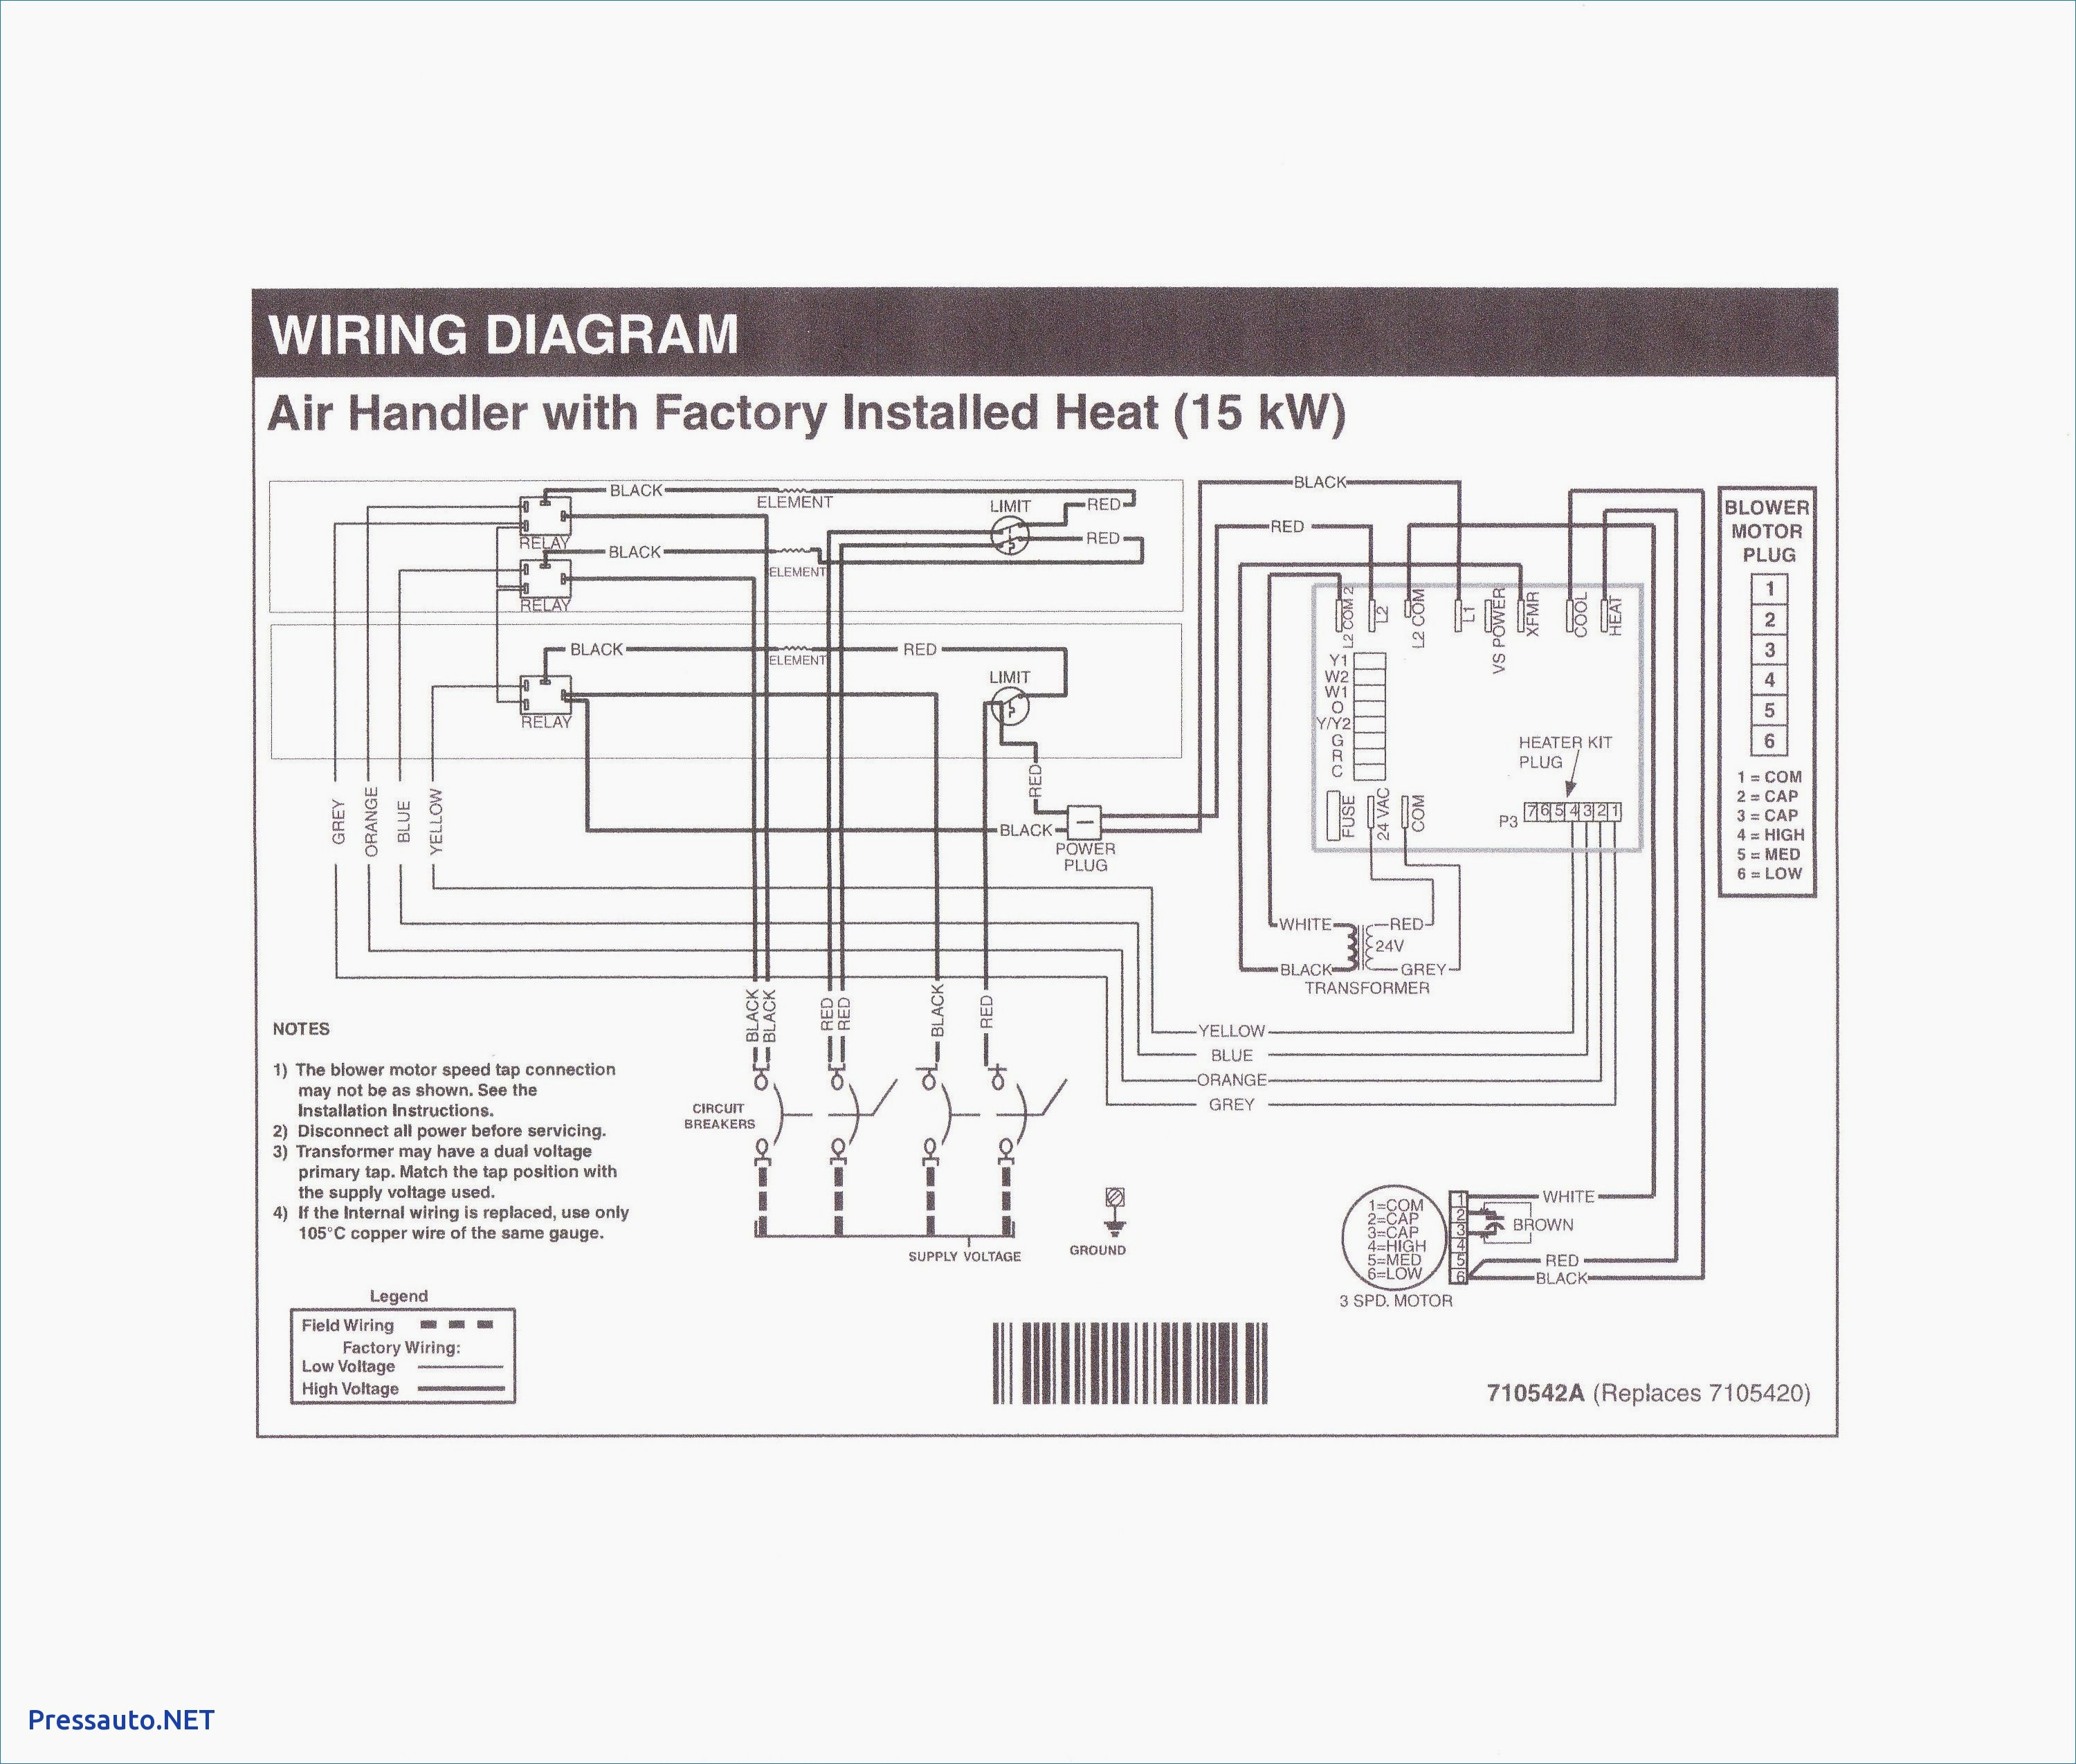 Electric Furnace Wiring Diagram Sequencer Natebird Me Stunning Heat - Electric Furnace Wiring Diagram Sequencer